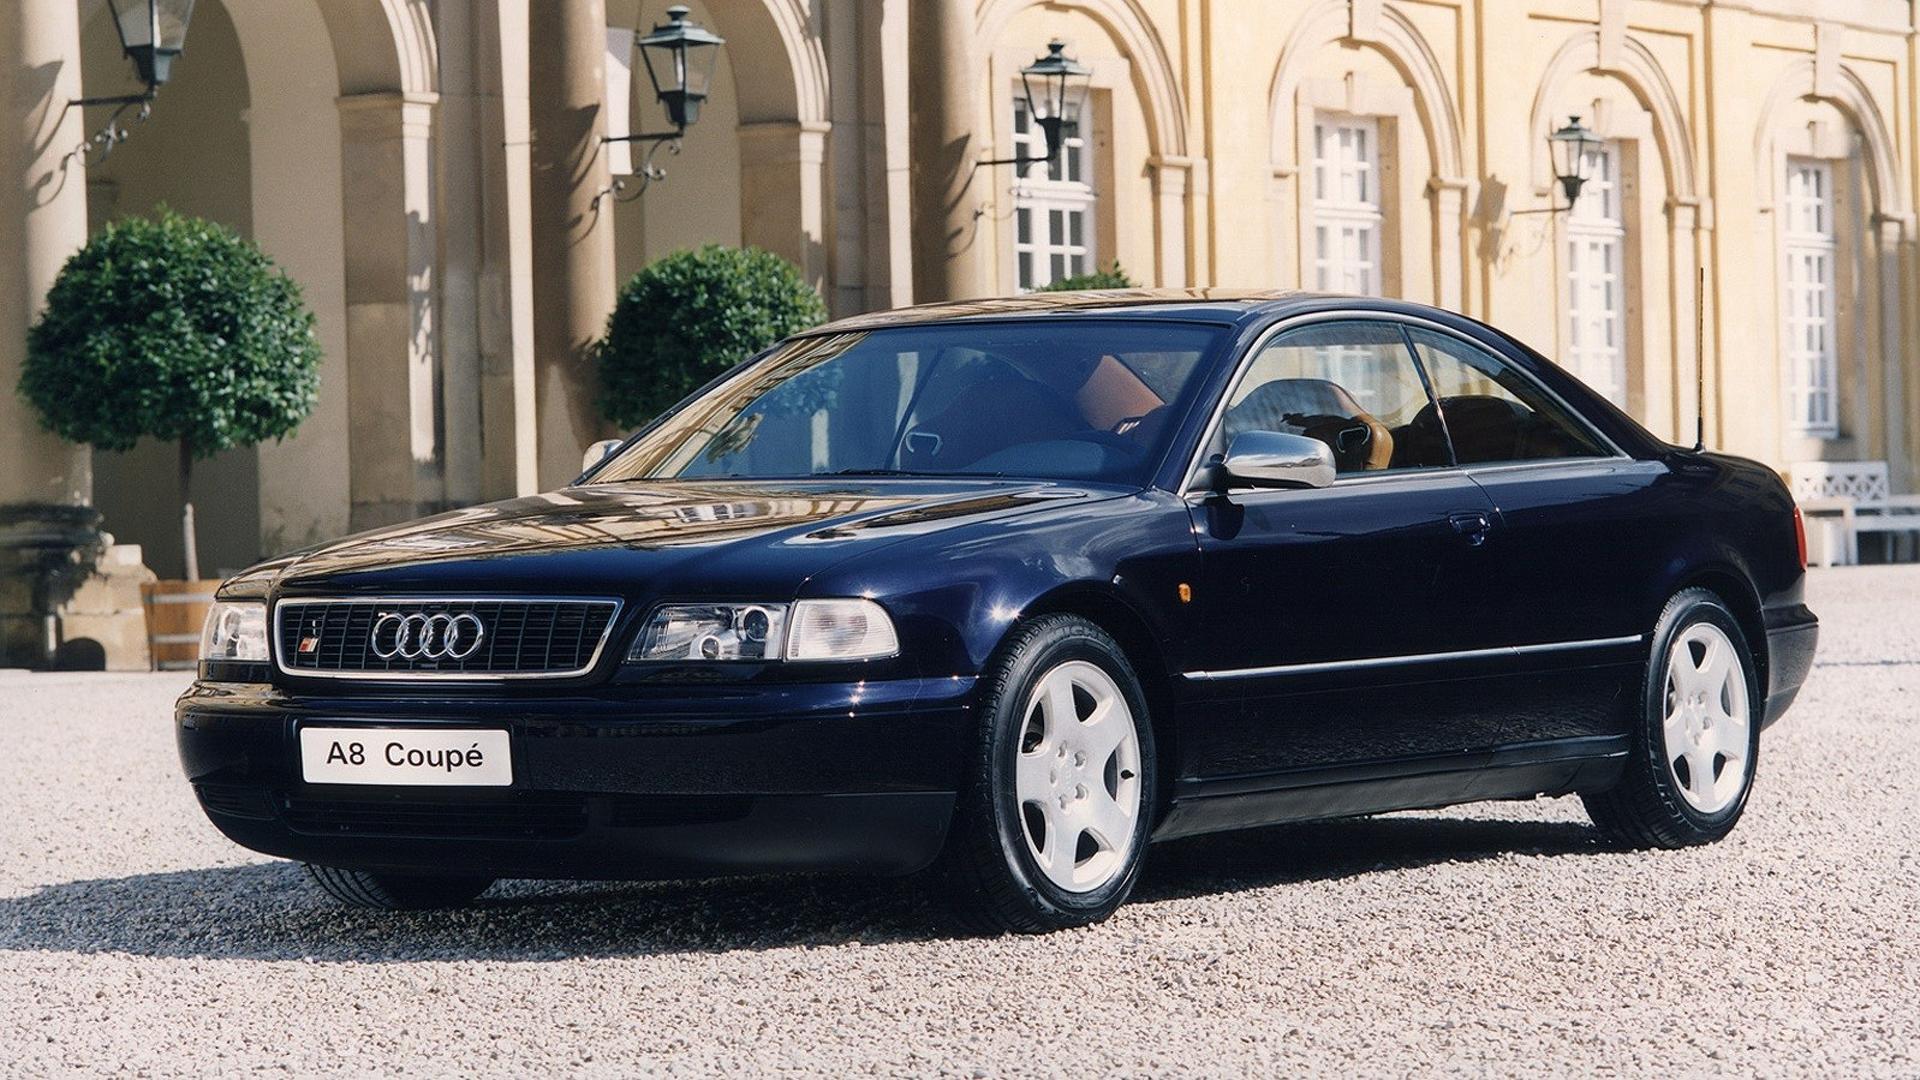 Audi A8 Coupe Might Have Been